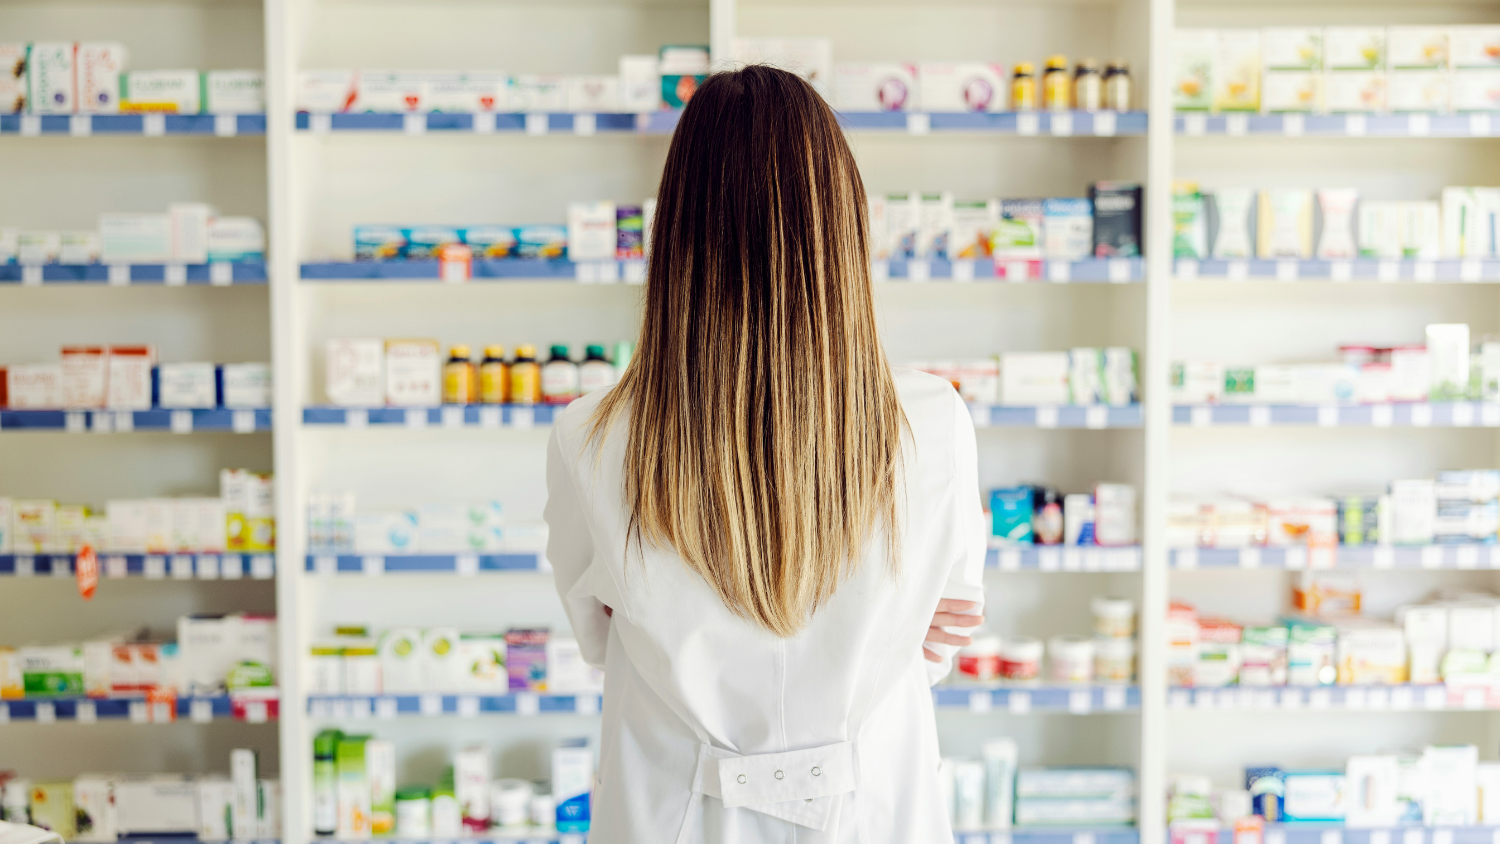 Long haired person stands in front of a wall of over the counter medication